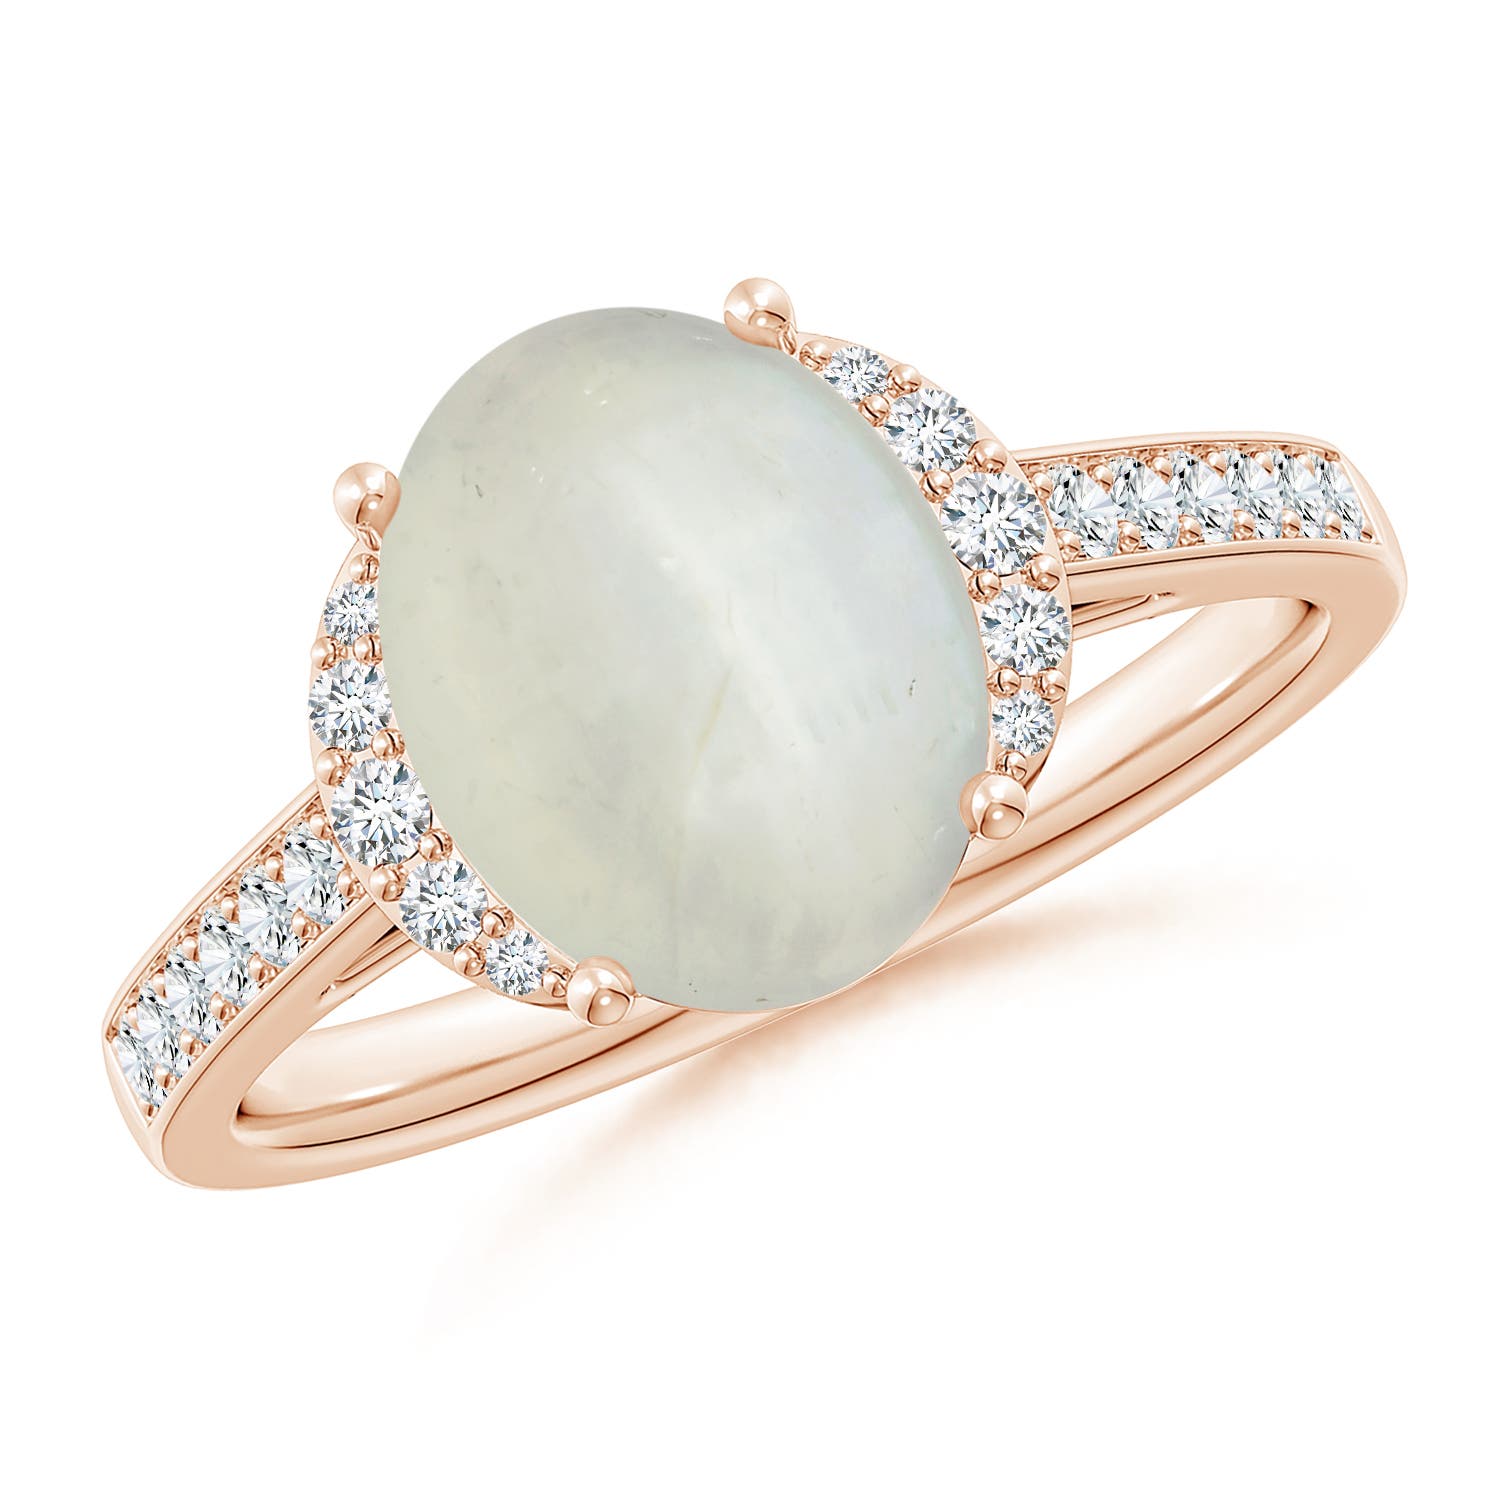 AA - Moonstone / 2.75 CT / 14 KT Rose Gold